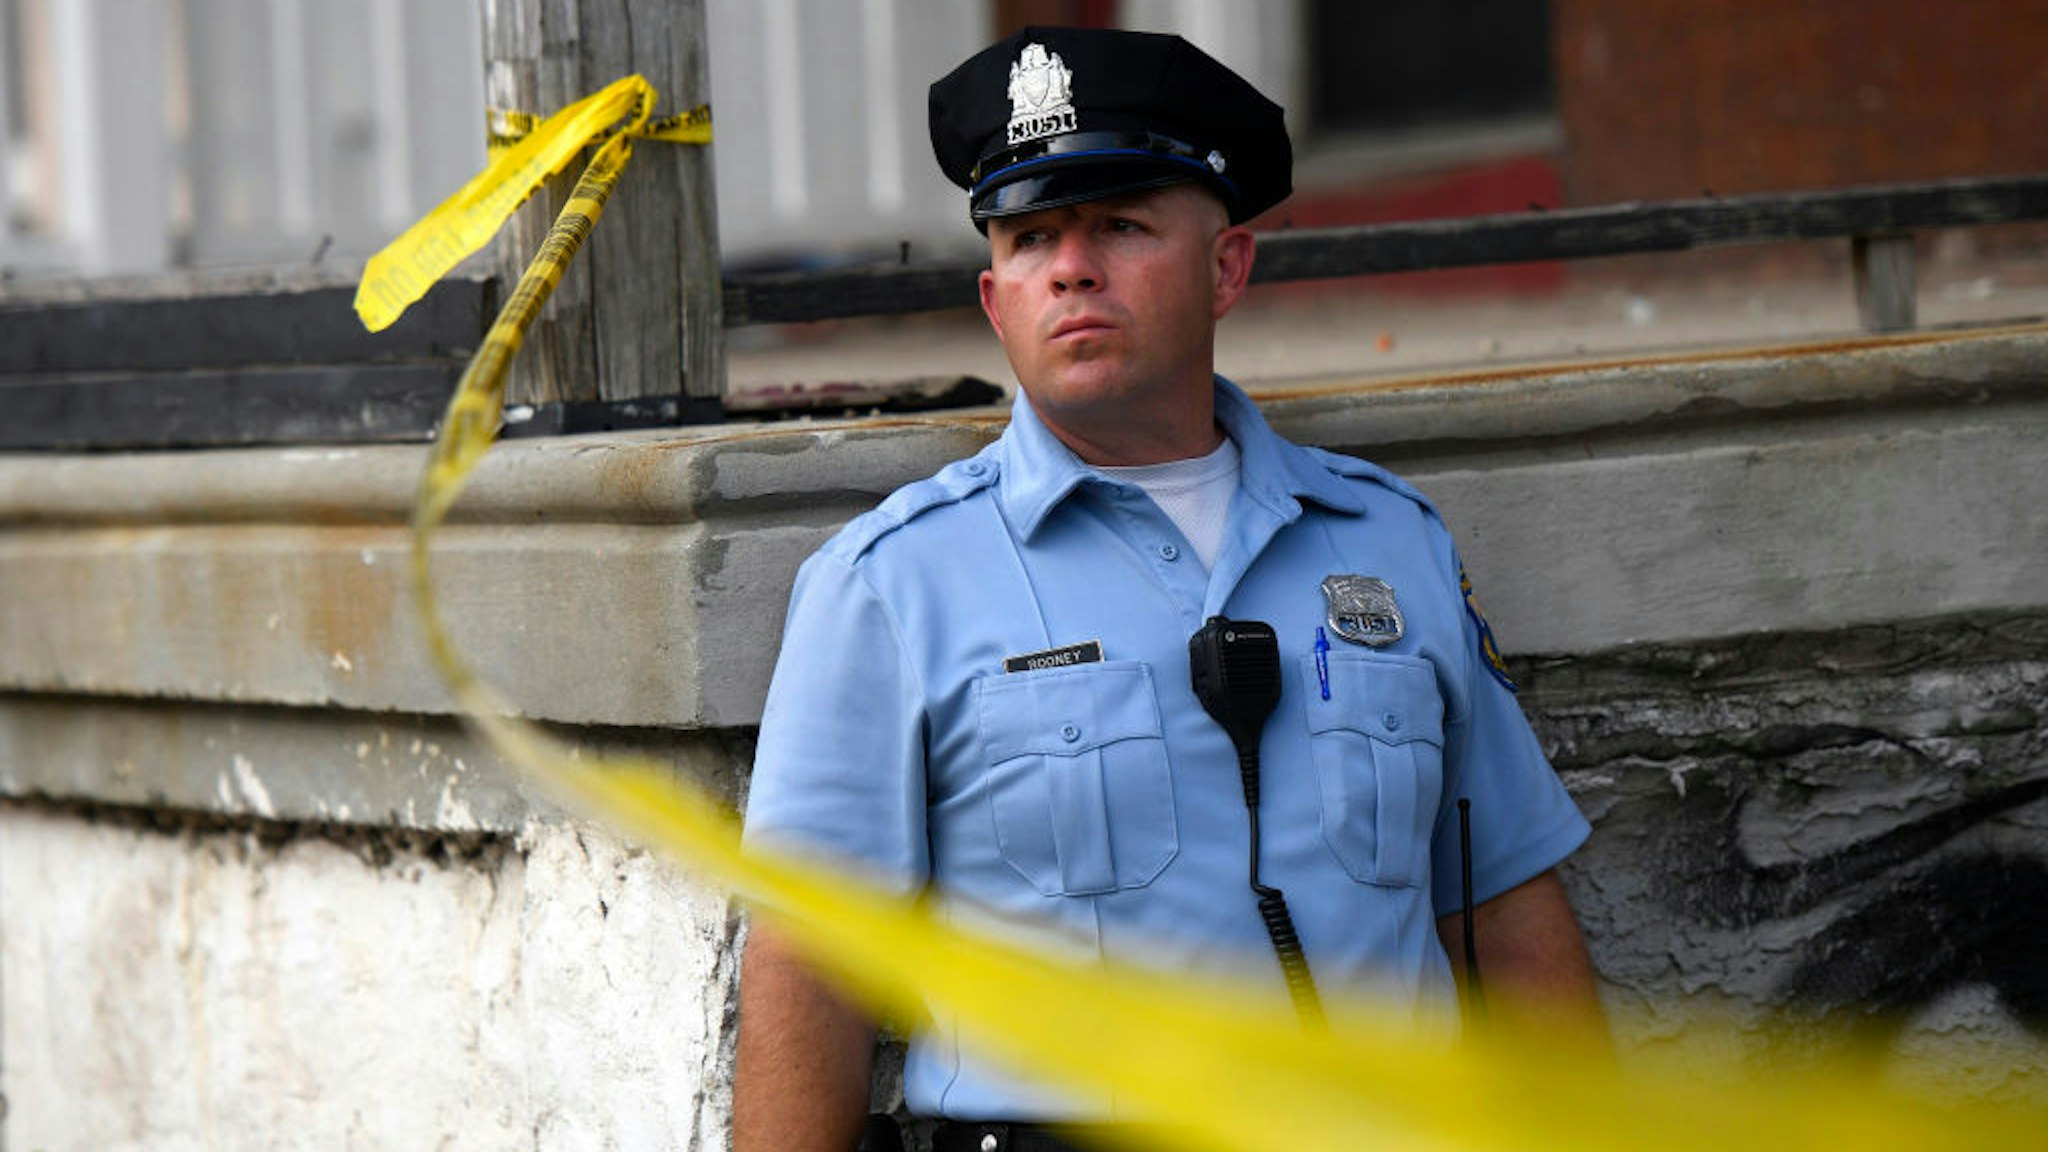 PHILADELPHIA, PA - AUGUST 14: A police officer monitors activity near a residence while responding to a shooting on August 14, 2019 in Philadelphia, Pennsylvania. At least six police officers were reportedly wounded in an hours-long standoff with a gunman that prompted a massive law enforcement response in the city's Nicetown-Tioga neighborhood. (Photo by Mark Makela/Getty Images)